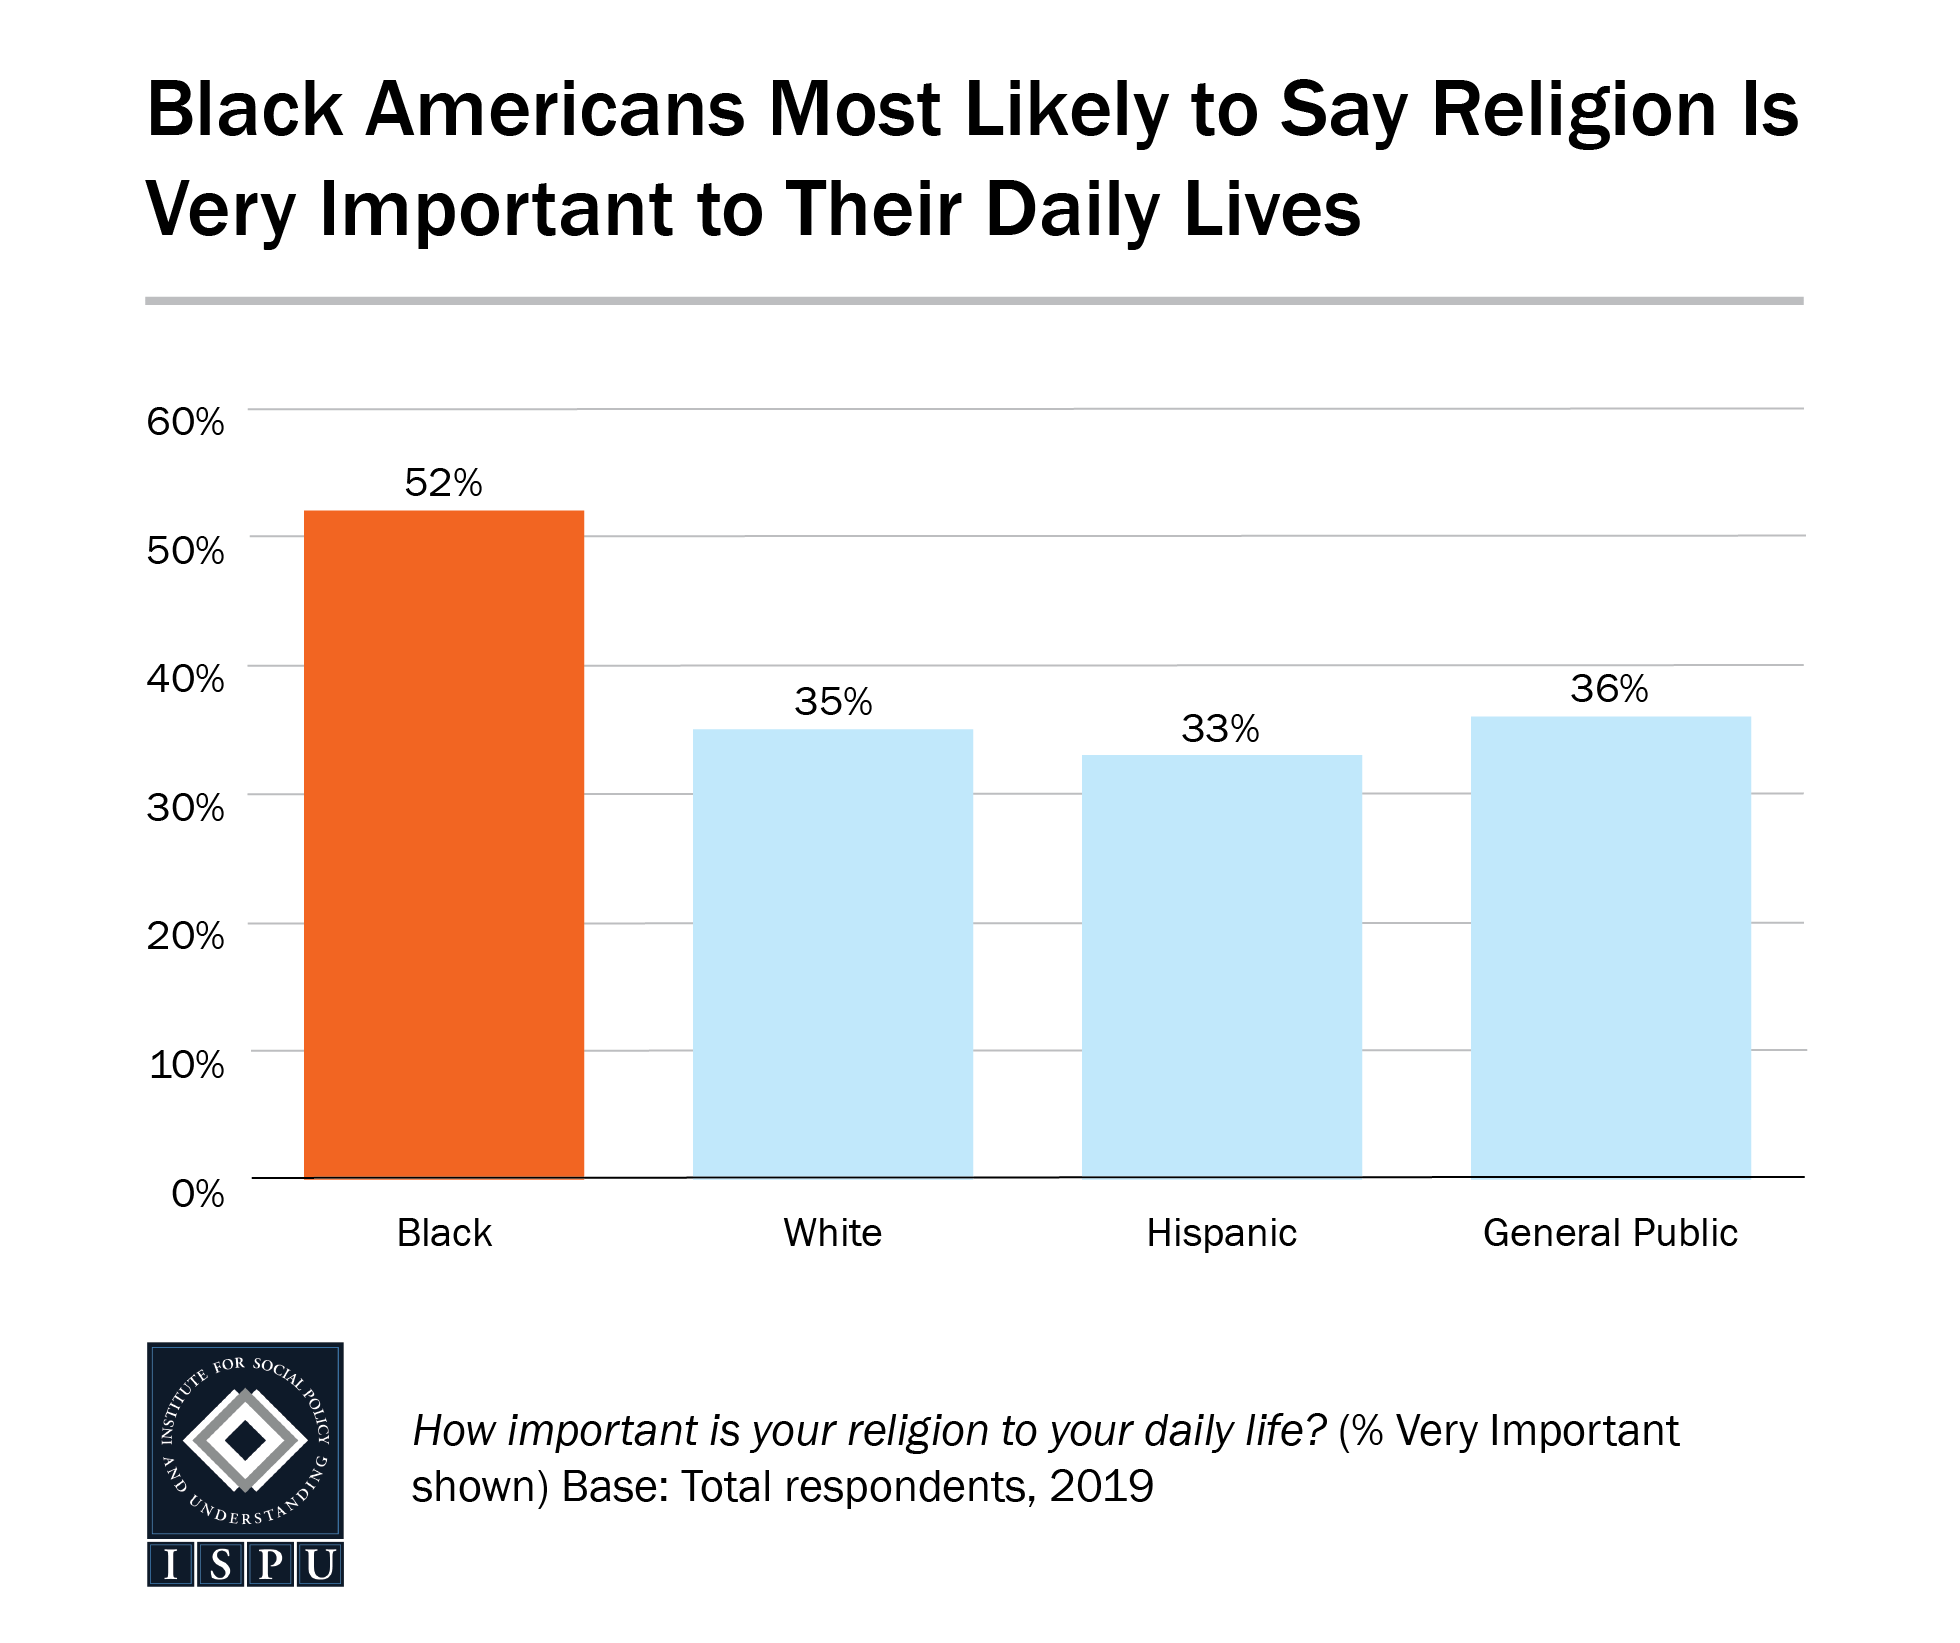 A bar graph showing that Black Americans are the most likely racial/ethnic group in the US to say that religion is very important to their daily lives